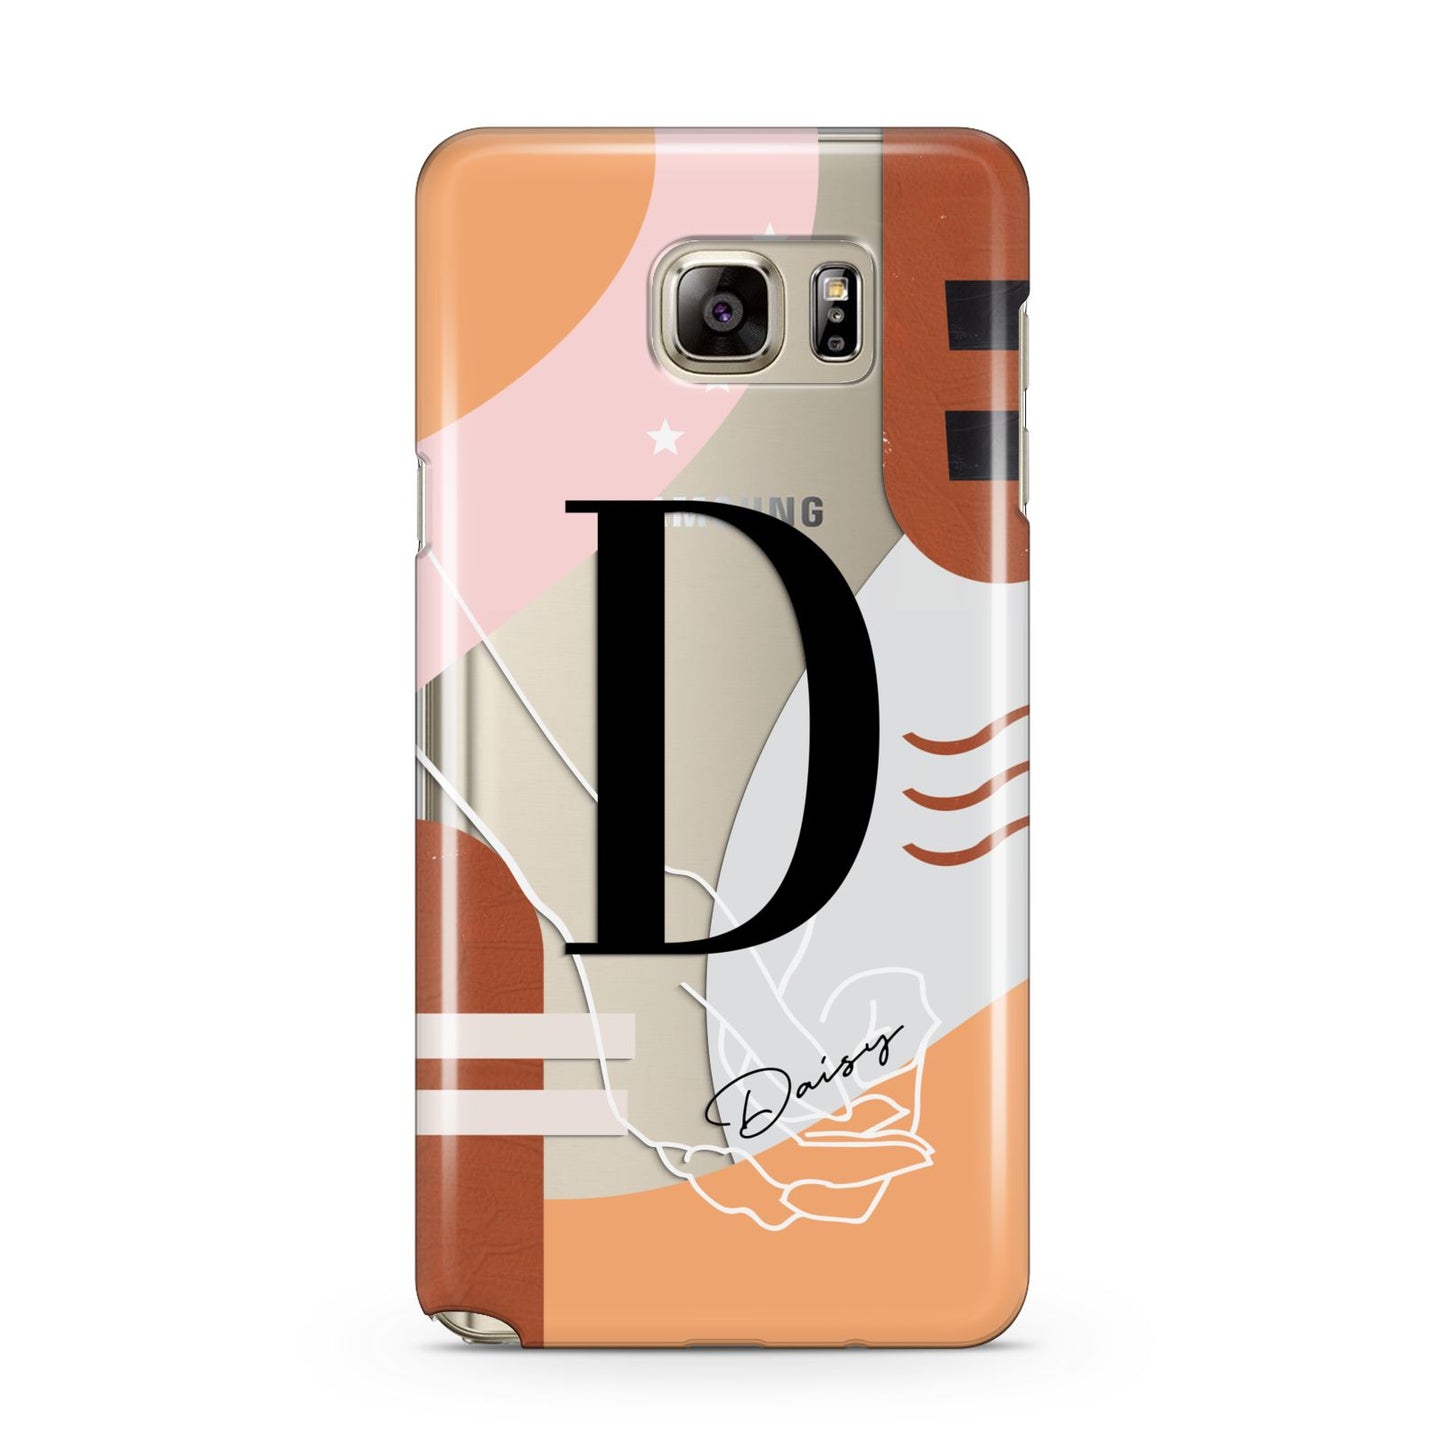 Personalised Abstract Samsung Galaxy Note 5 Case